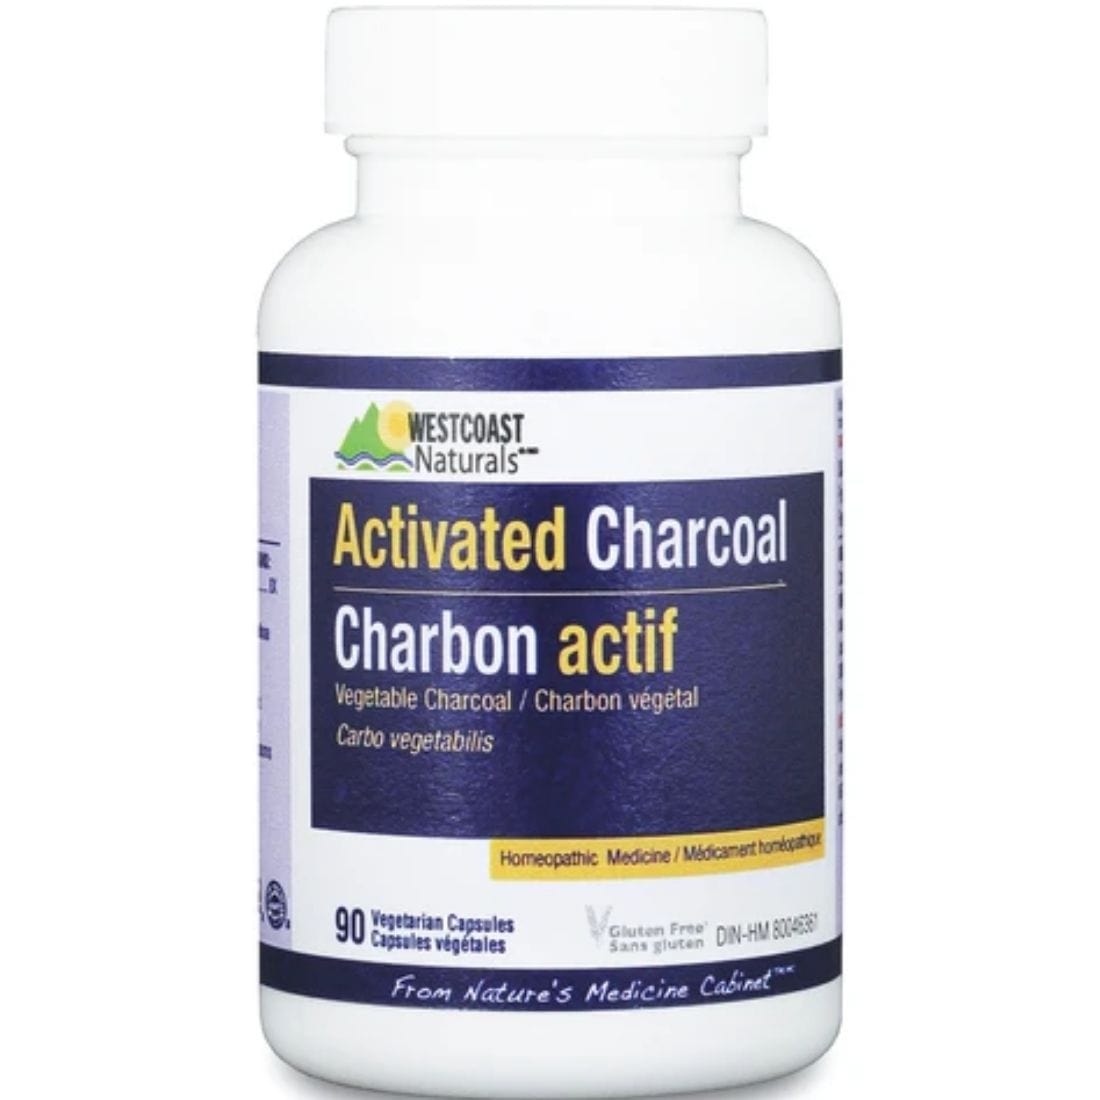 Westcoast Naturals Activated Charcoal